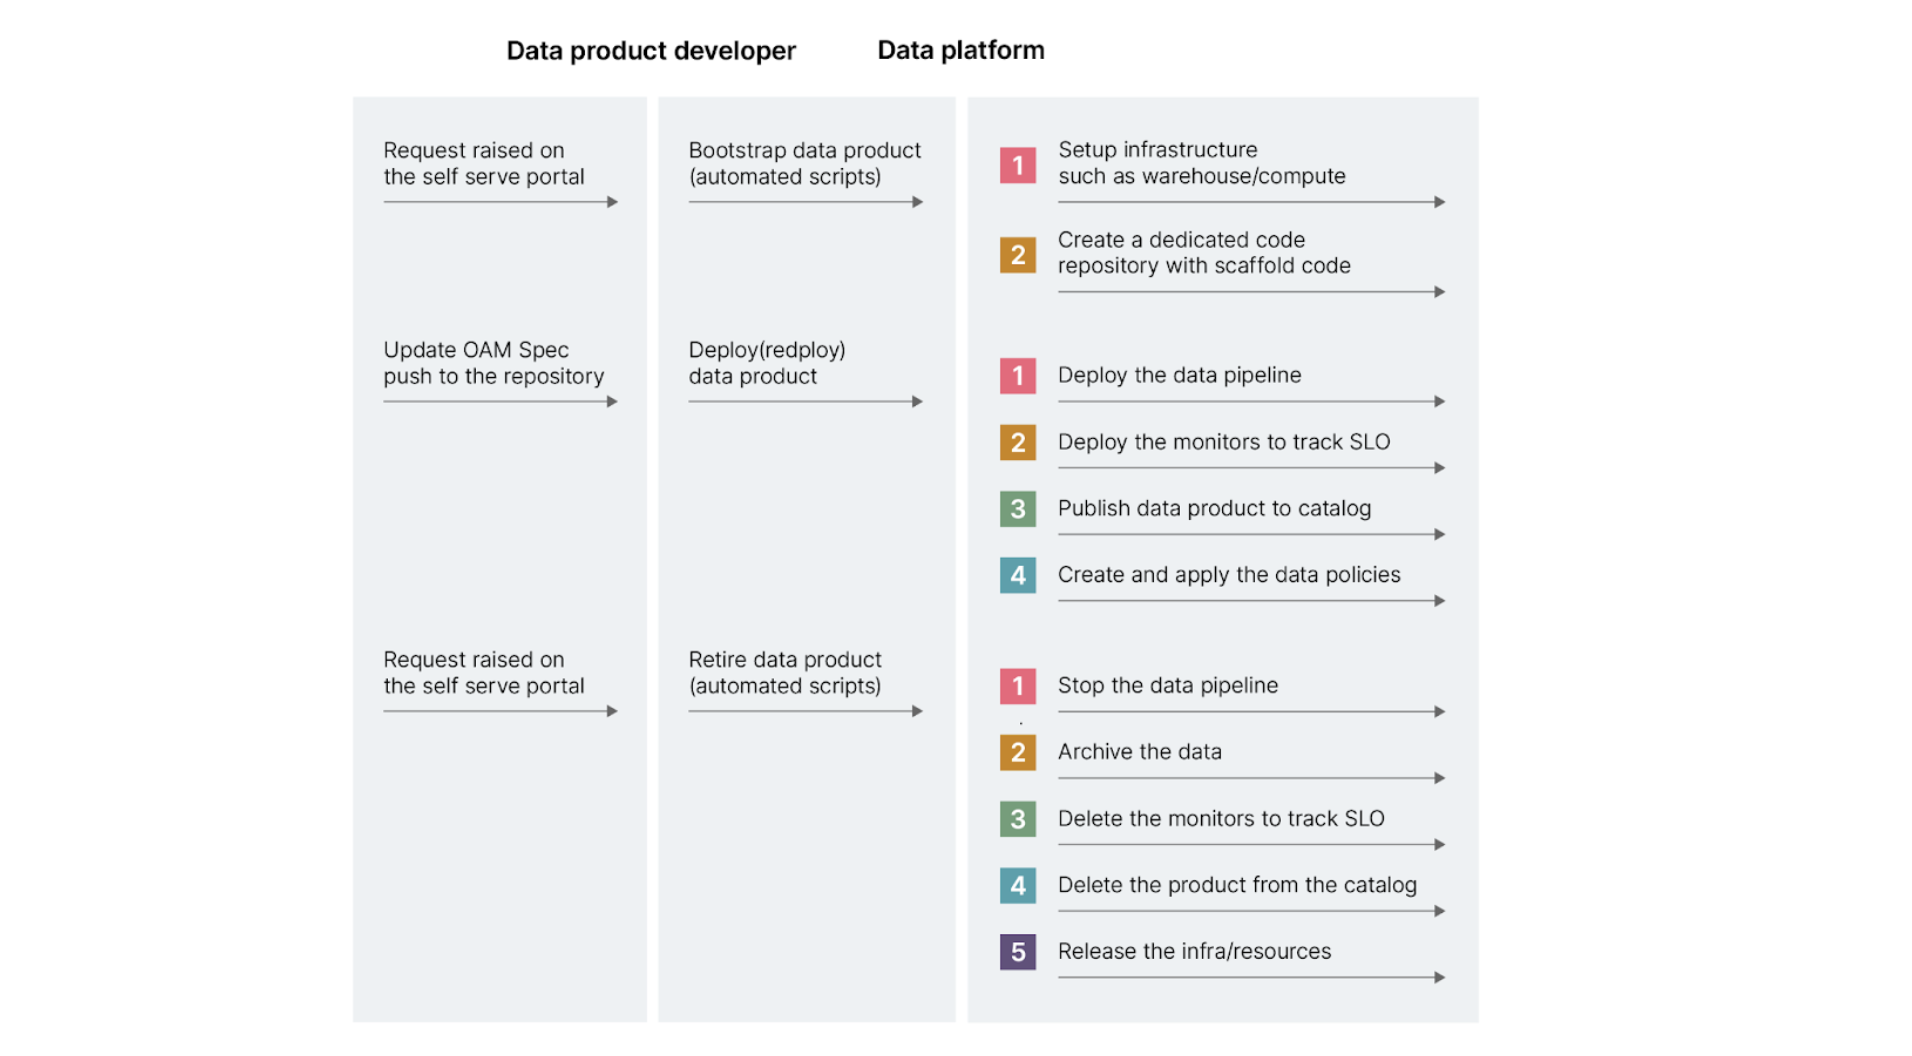 the sequence of interaction between the data product developer and data platform. The Bootstrap Data Product stage starts with the data product developer raising the request on the self-serve portal , as a result the platform does the infrastructure setup and creation of a dedicated code repository with scaffold code. Followed by this,the Deploy data product stage starts with the data product developer pushing the updated the OAM spec to the repository, as a result the platform deploys the data pipelines,deploys the monitors to track SLO,publishes data product to catalog and finally creates and applies the data policies.The Retire Data Product stage starts with the data product developer raising the request on the self serve portal based the Data Product usage metrics, as a result the platform stops the data pipeline,archives the data,deletes the monitors used to track the SLO, deletes the product from the catalog and releases the infra/resources.